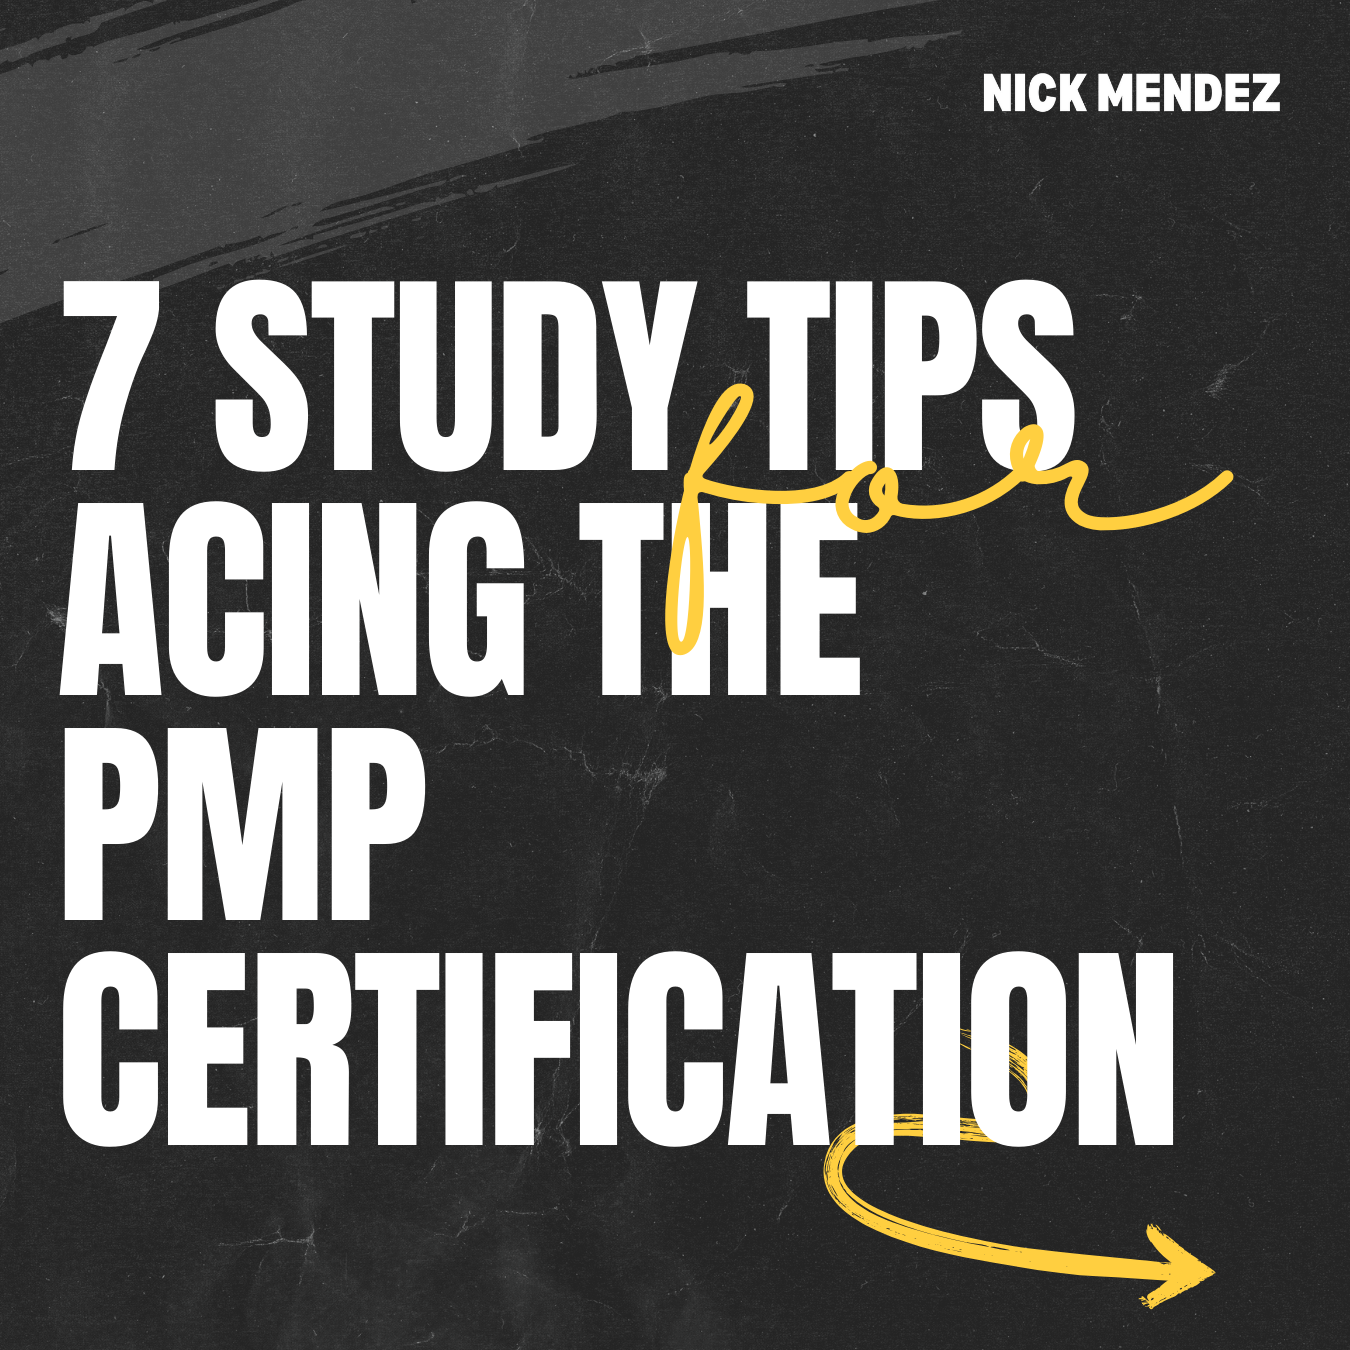 7 Study Tips for Acing the PMP Certification by Nick Mendez